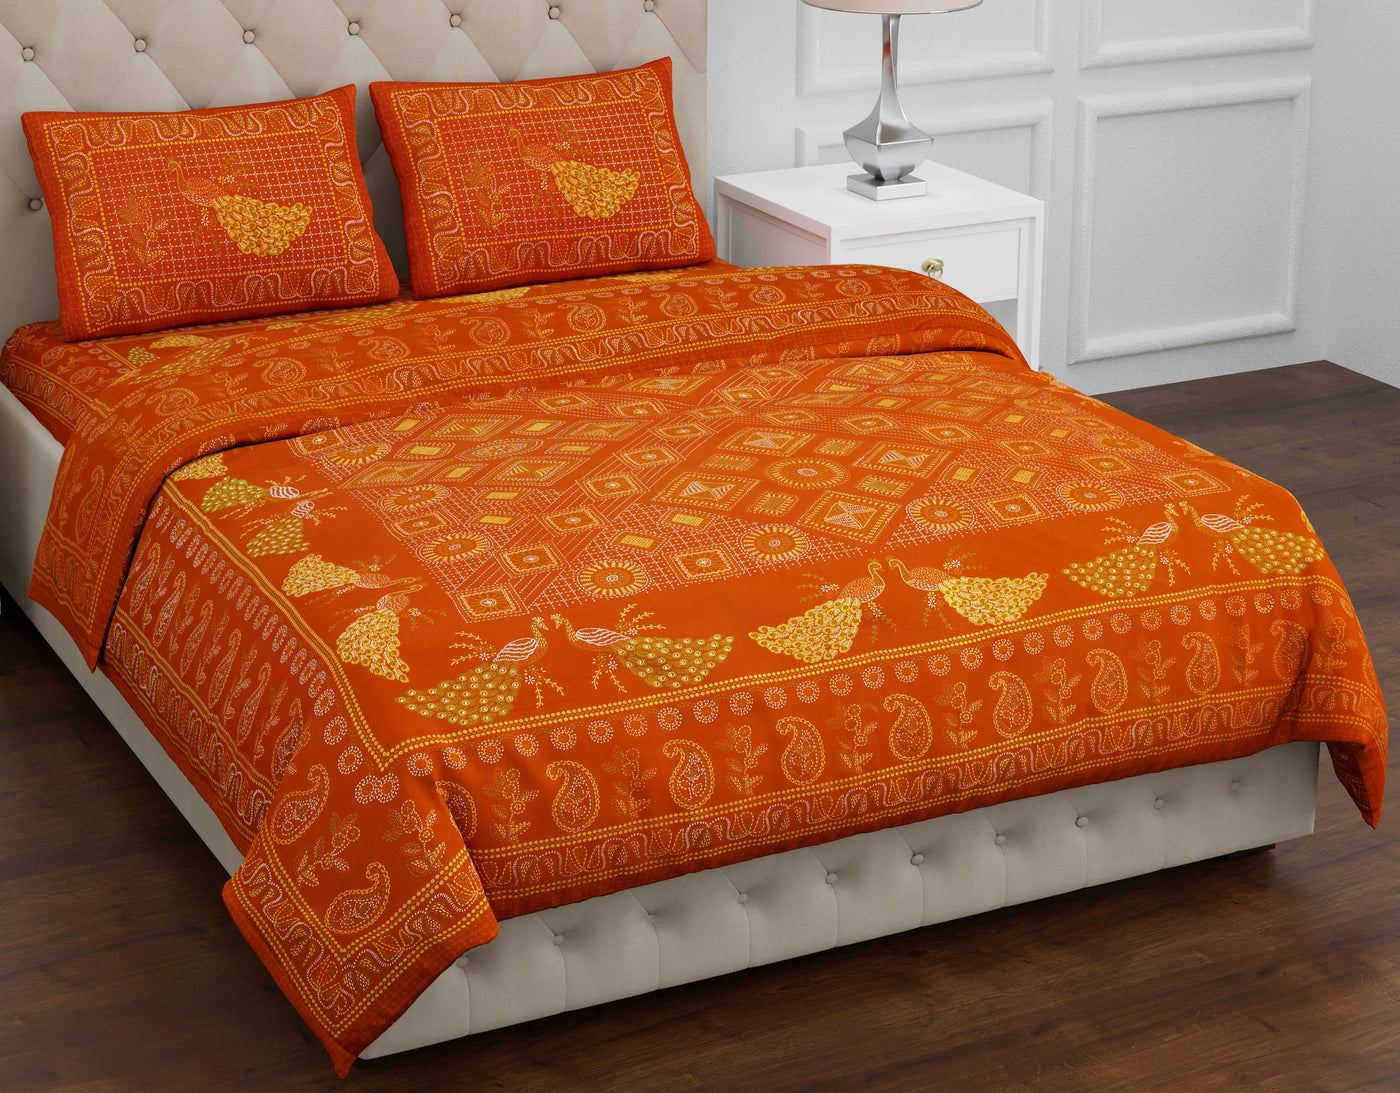 King Size Orange bedsheet for Double Bed by braise 